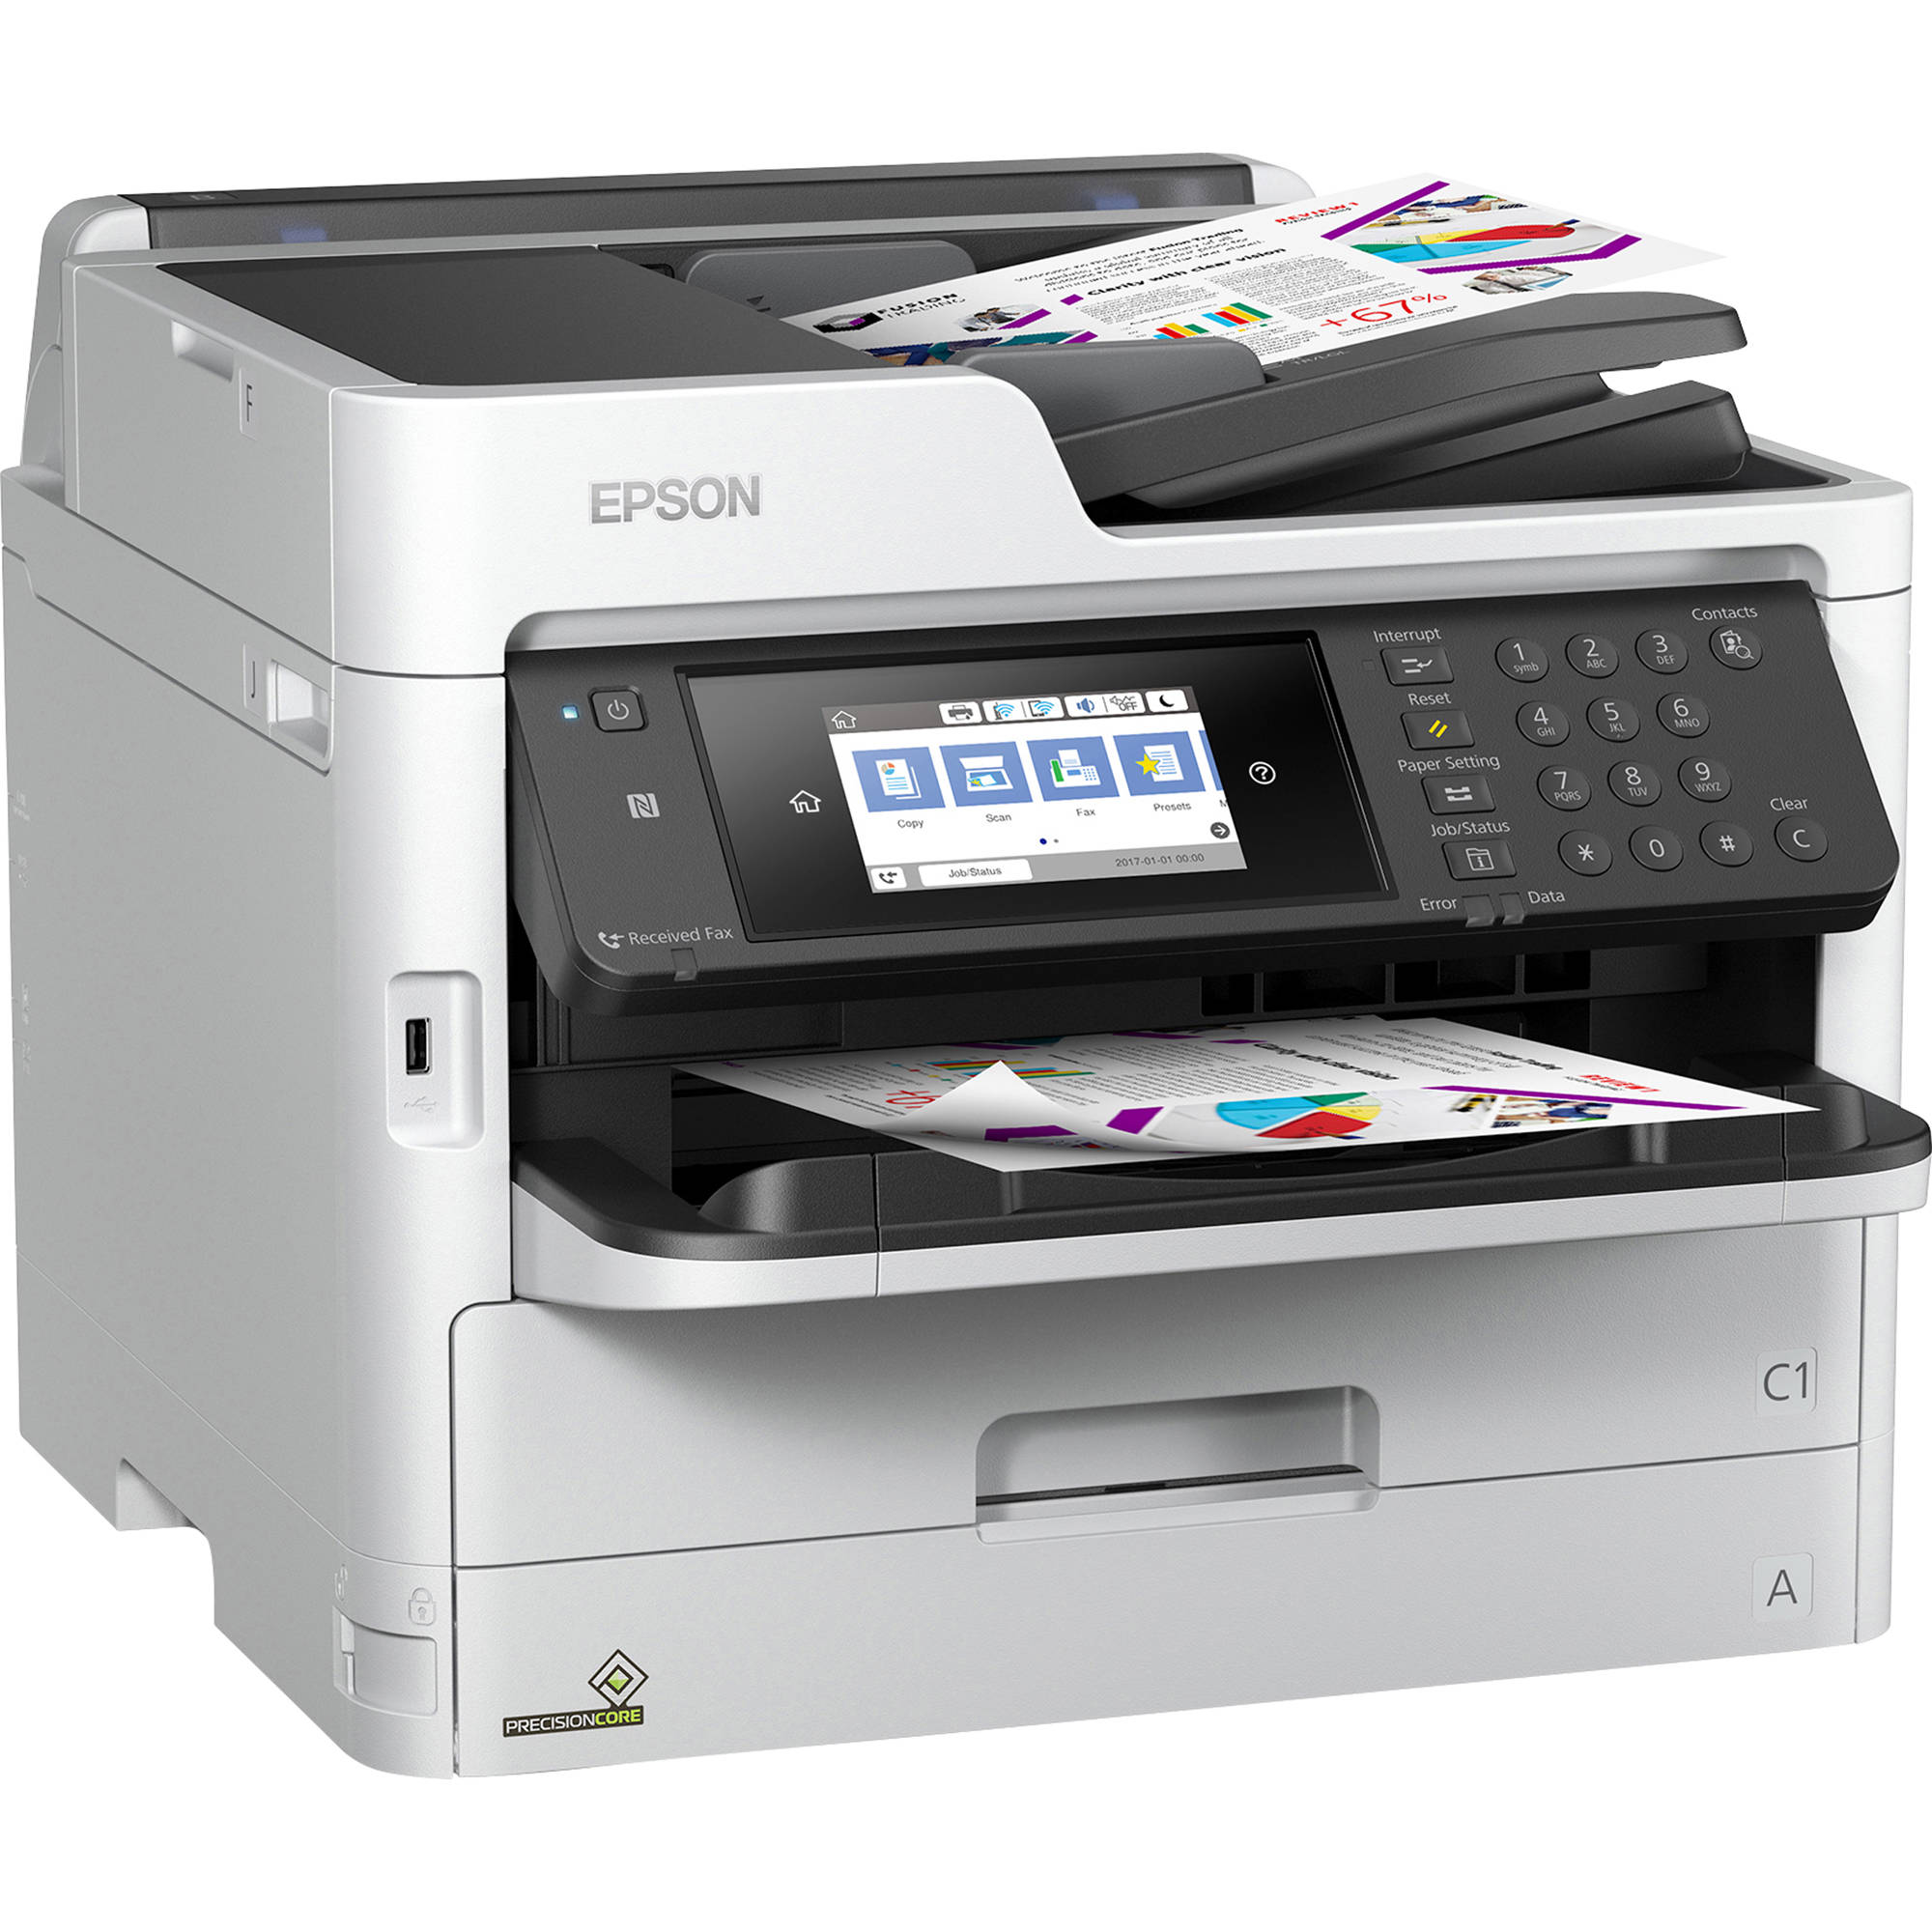 Absolute Toner New Epson WorkForce Pro WF-C5790 Network Multifunction Color Printer With Replaceable Ink Pack System For Office Use Showroom Color Copier